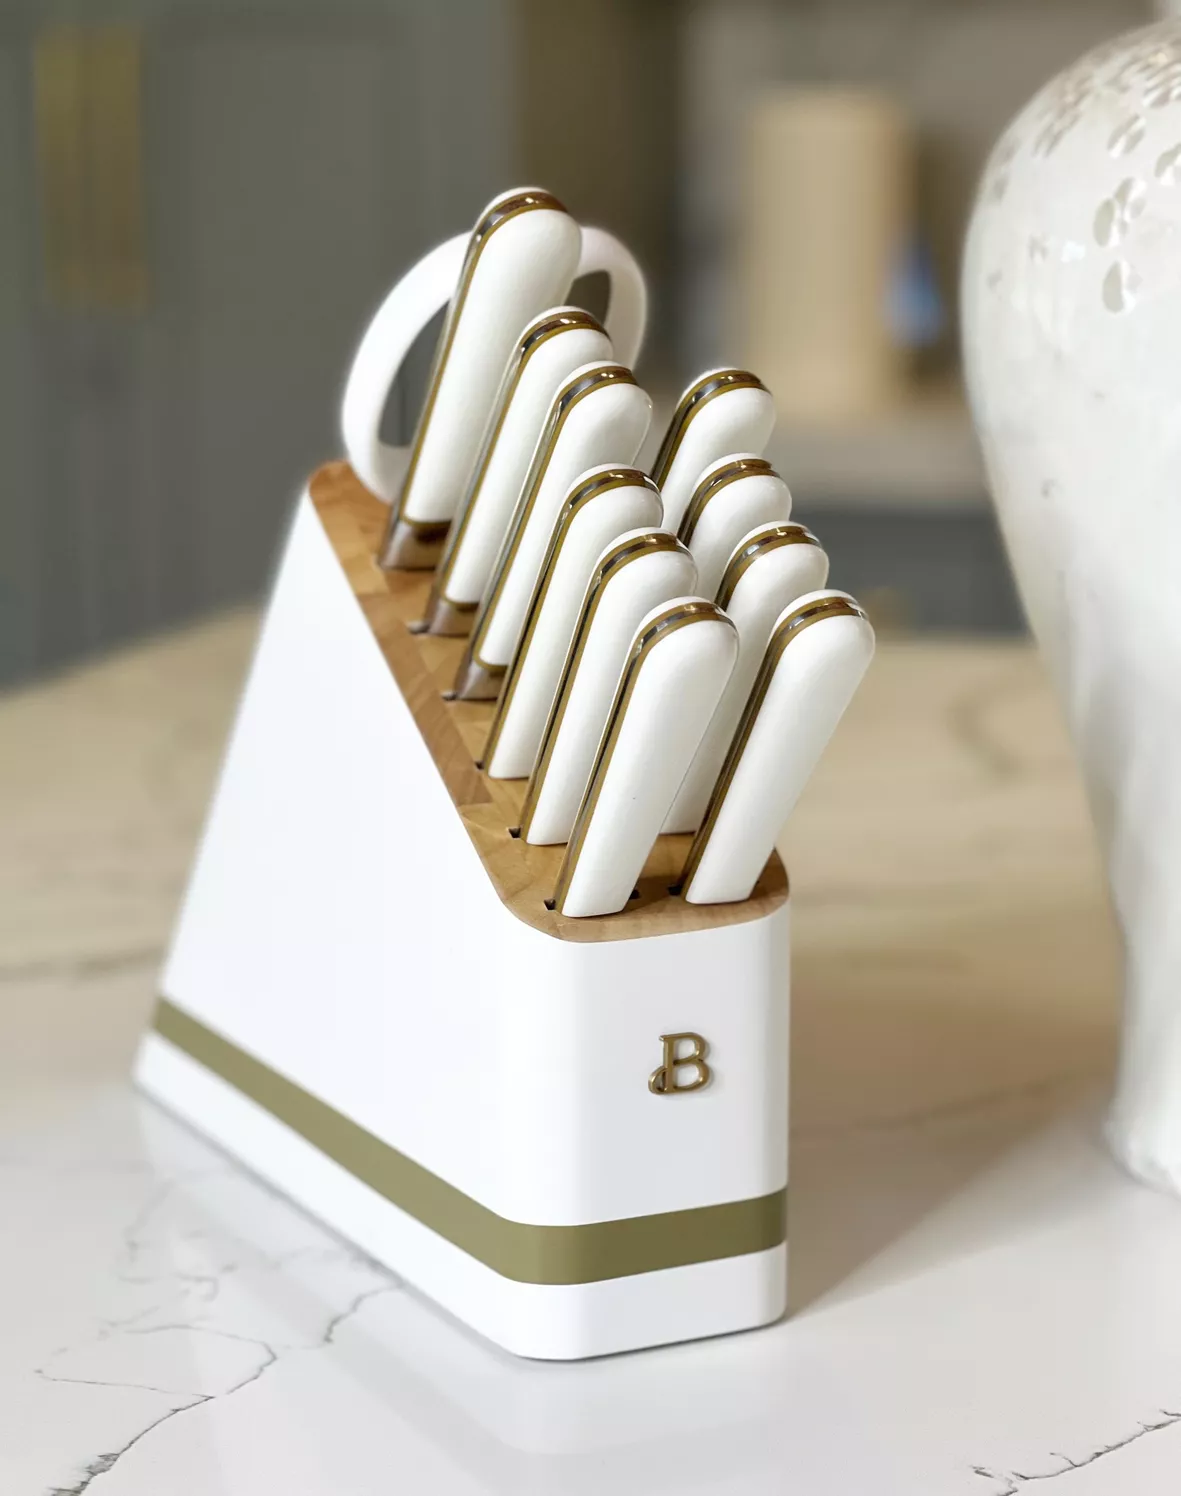 Beautiful 12-piece Forged Kitchen Knife Set in White with Wood Storage Block,  by Drew Barrymore 